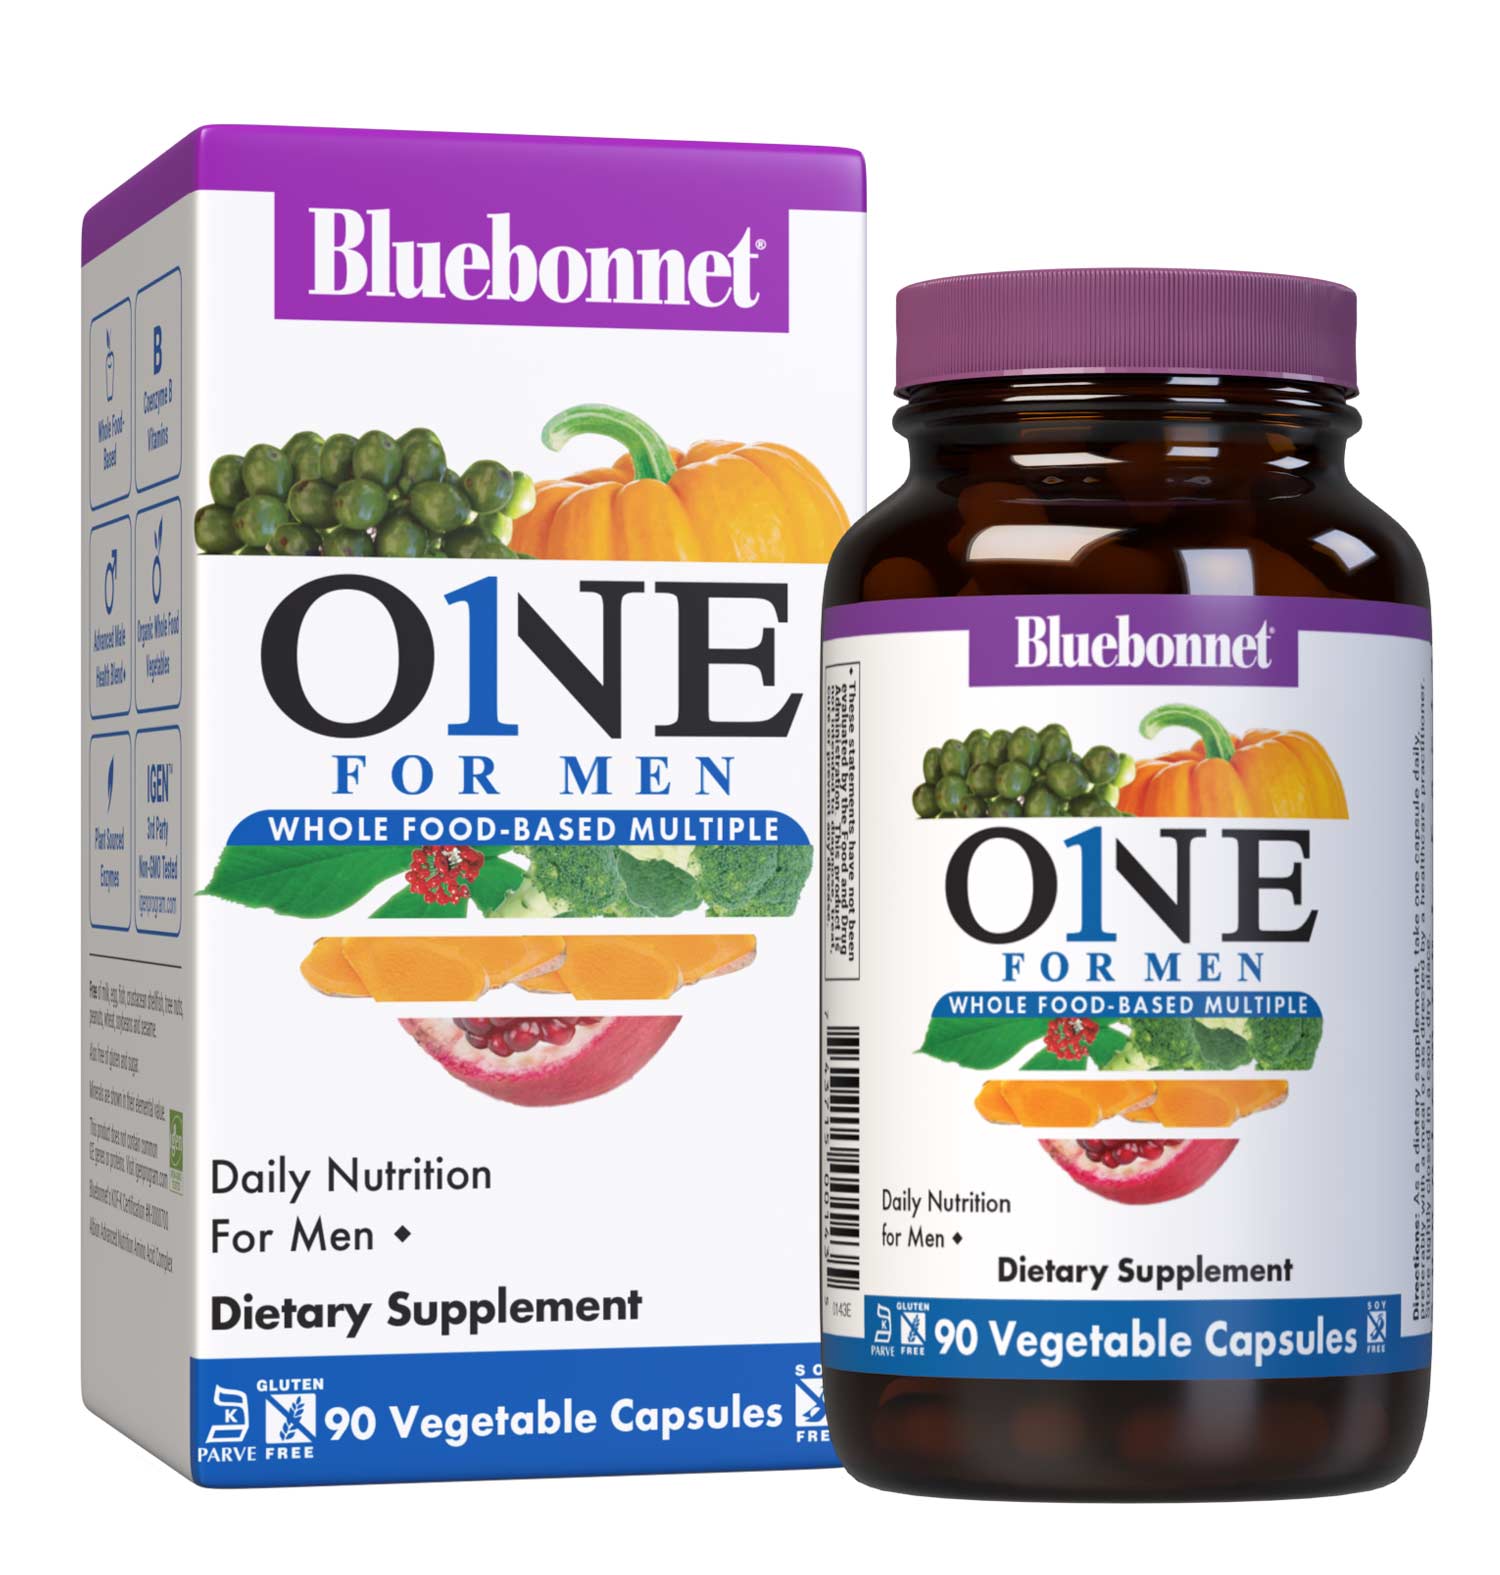 Bluebonnet’s Men's One Whole Food-Based Multiple 90 vegetable capsules is formulated with over 25 crucial nutrients like vitamin K2 and vitamin E from sunflower, all the coenzyme forms of the B vitamins, plus Albion chelated minerals in addition to an organic whole food vegetable blend, a plant-sourced enzyme blend, and a unique male health blend for daily nutrition and well being. Bottle with box. #size_90 count